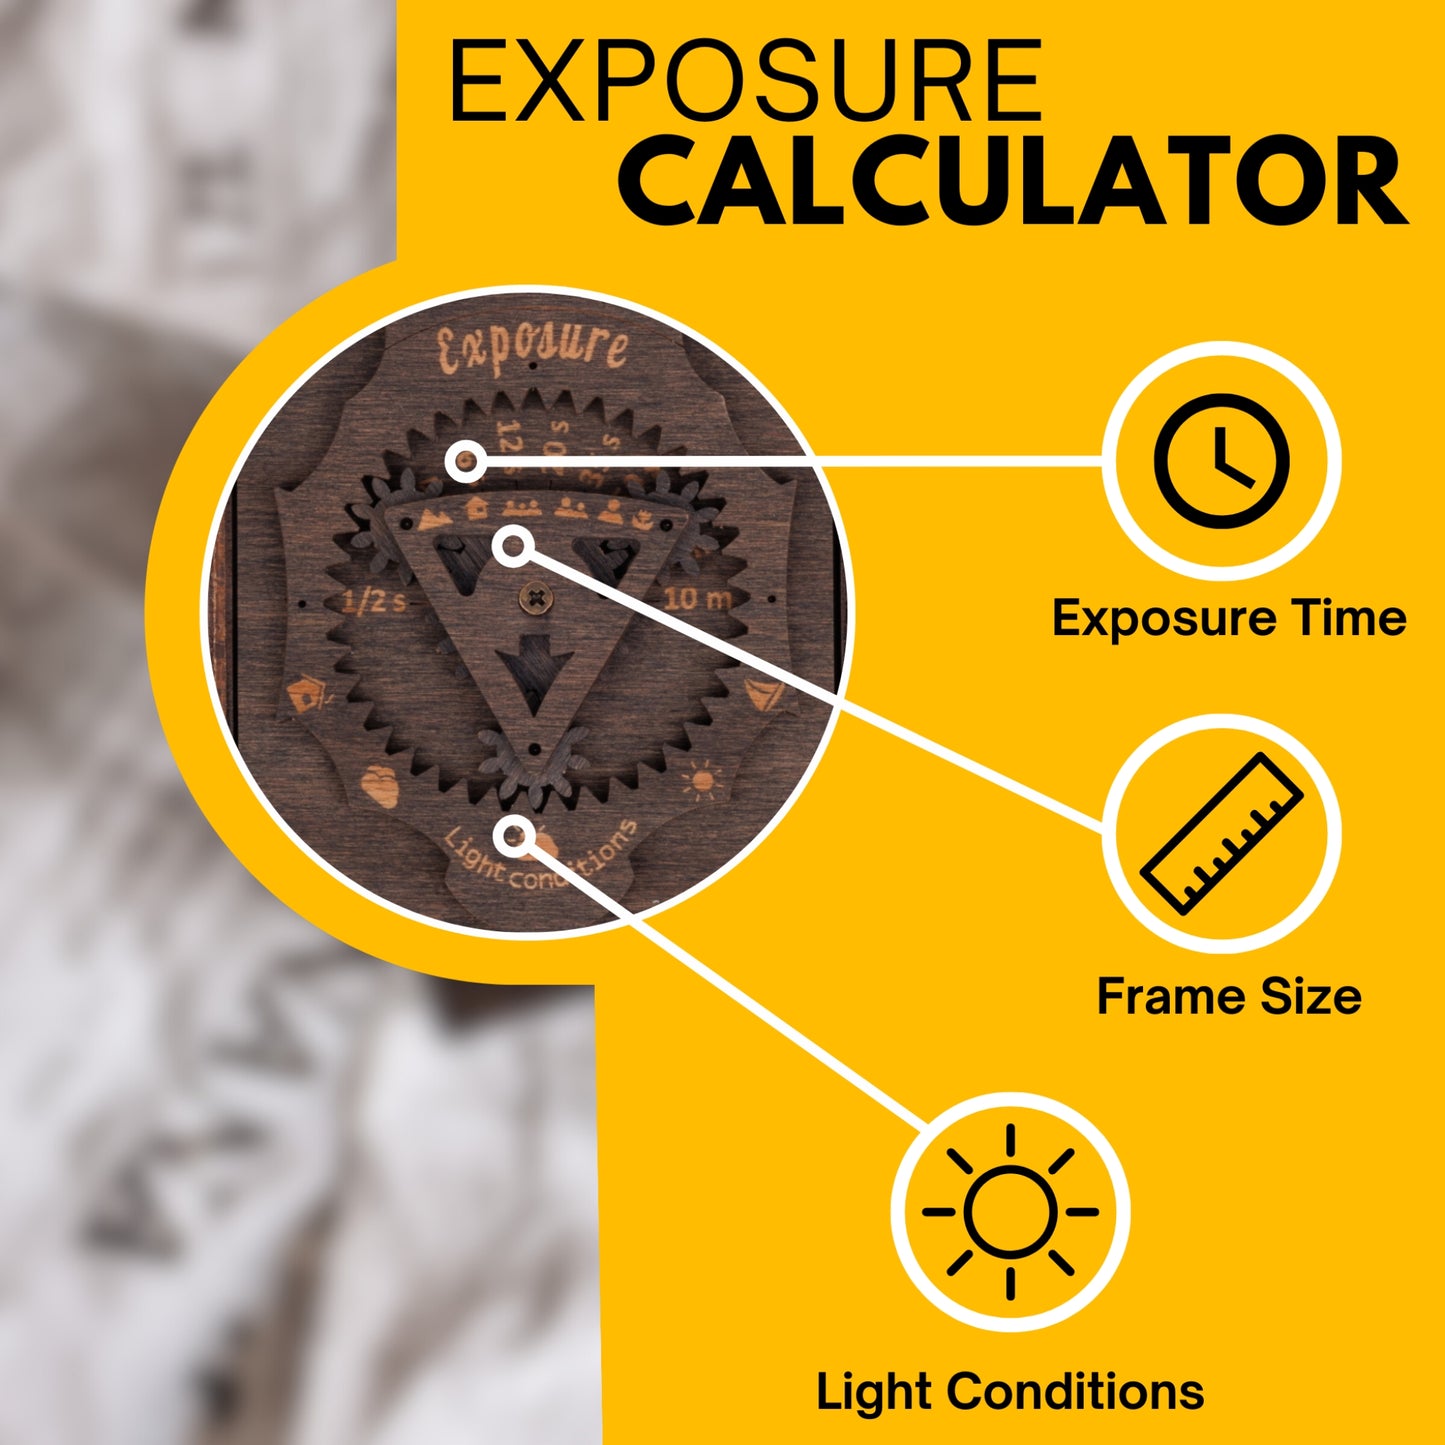 Infographics of an exposure calculator positioned on the rear cover of a stained brown Jollylook camera, providing quick-reference guidelines for photographers. The infographic delineates specifications including exposure time, image size, and lighting conditions, enabling users to ascertain optimal settings for various lightings.